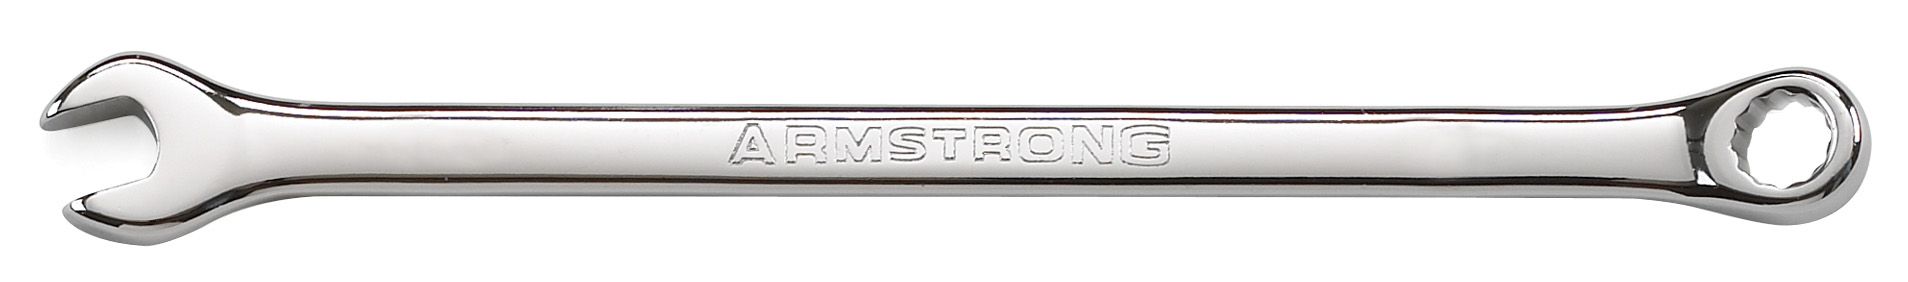 Armstrong 19 mm 12 pt. Full Polish Long Combination Wrench